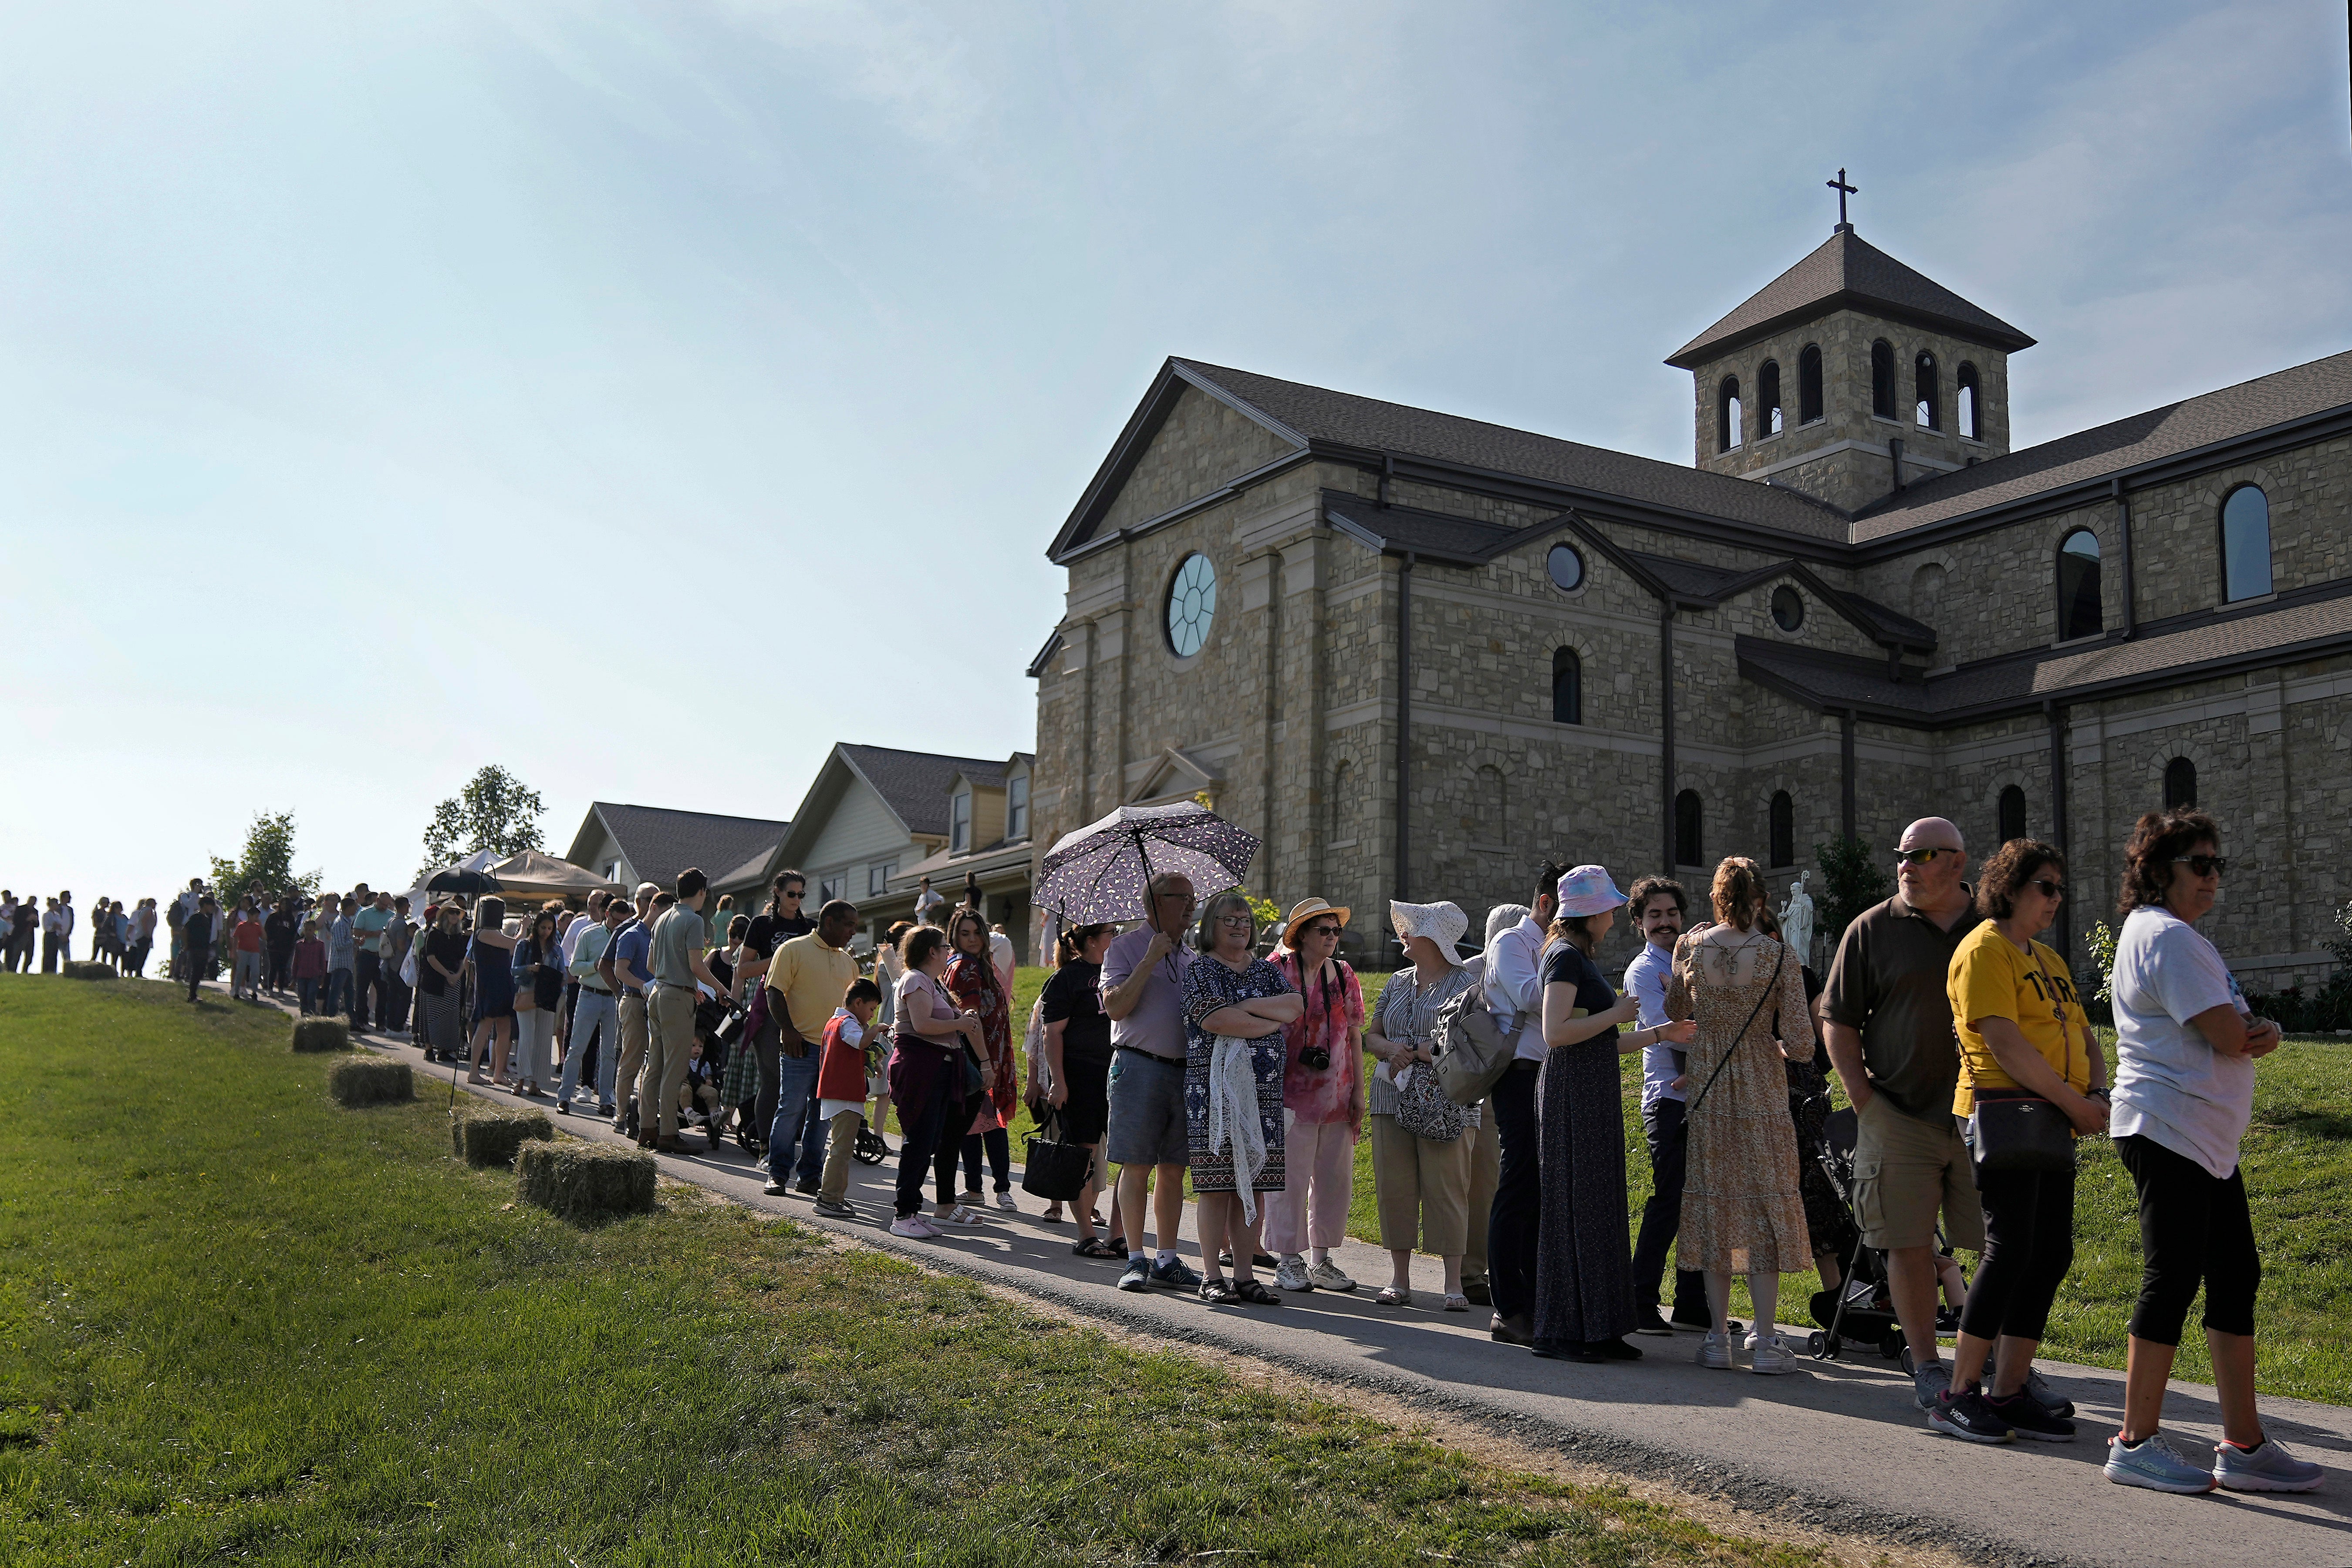 People wait to view the body of Sister Wilhelmina Lancaster at the Benedictines of Mary, Queen of Apostles abbey Sunday, May 28, 2023, near Gower, Mo.Hundreds of people visited the small town in Missouri this week to see the nun's body that has barely decomposed since 2019 â some are saying it's a sign of holiness in Catholicism, while others are saying the lack of decomposition may not be as rare as people think. (AP Photo/Charlie Riedel)